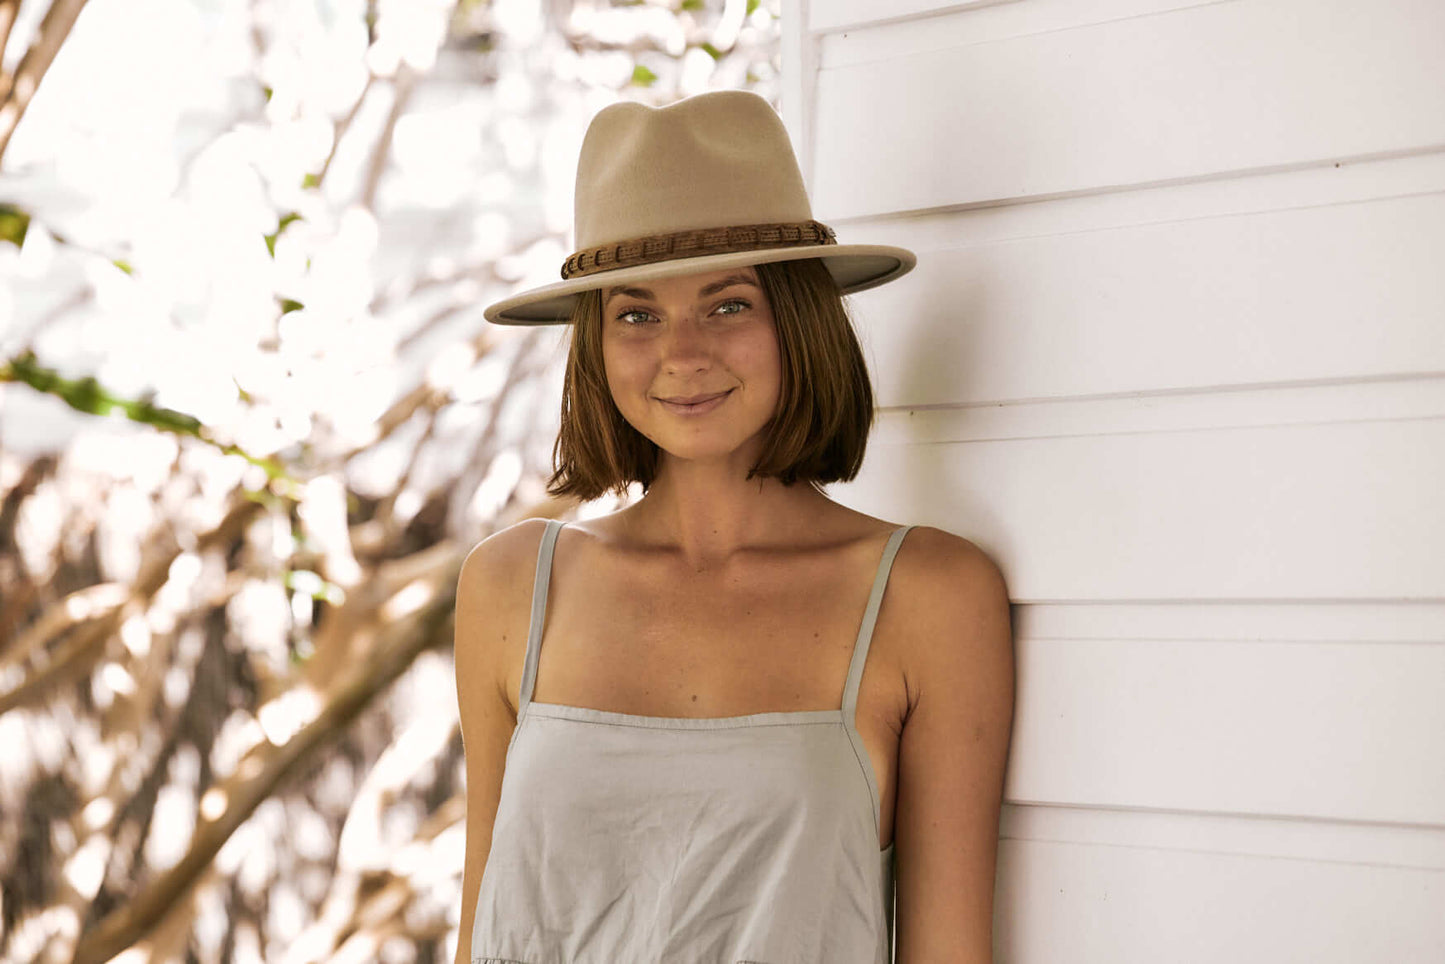 Woman standing outside smiling wearing outback wool hat in color Putty with leather hat band